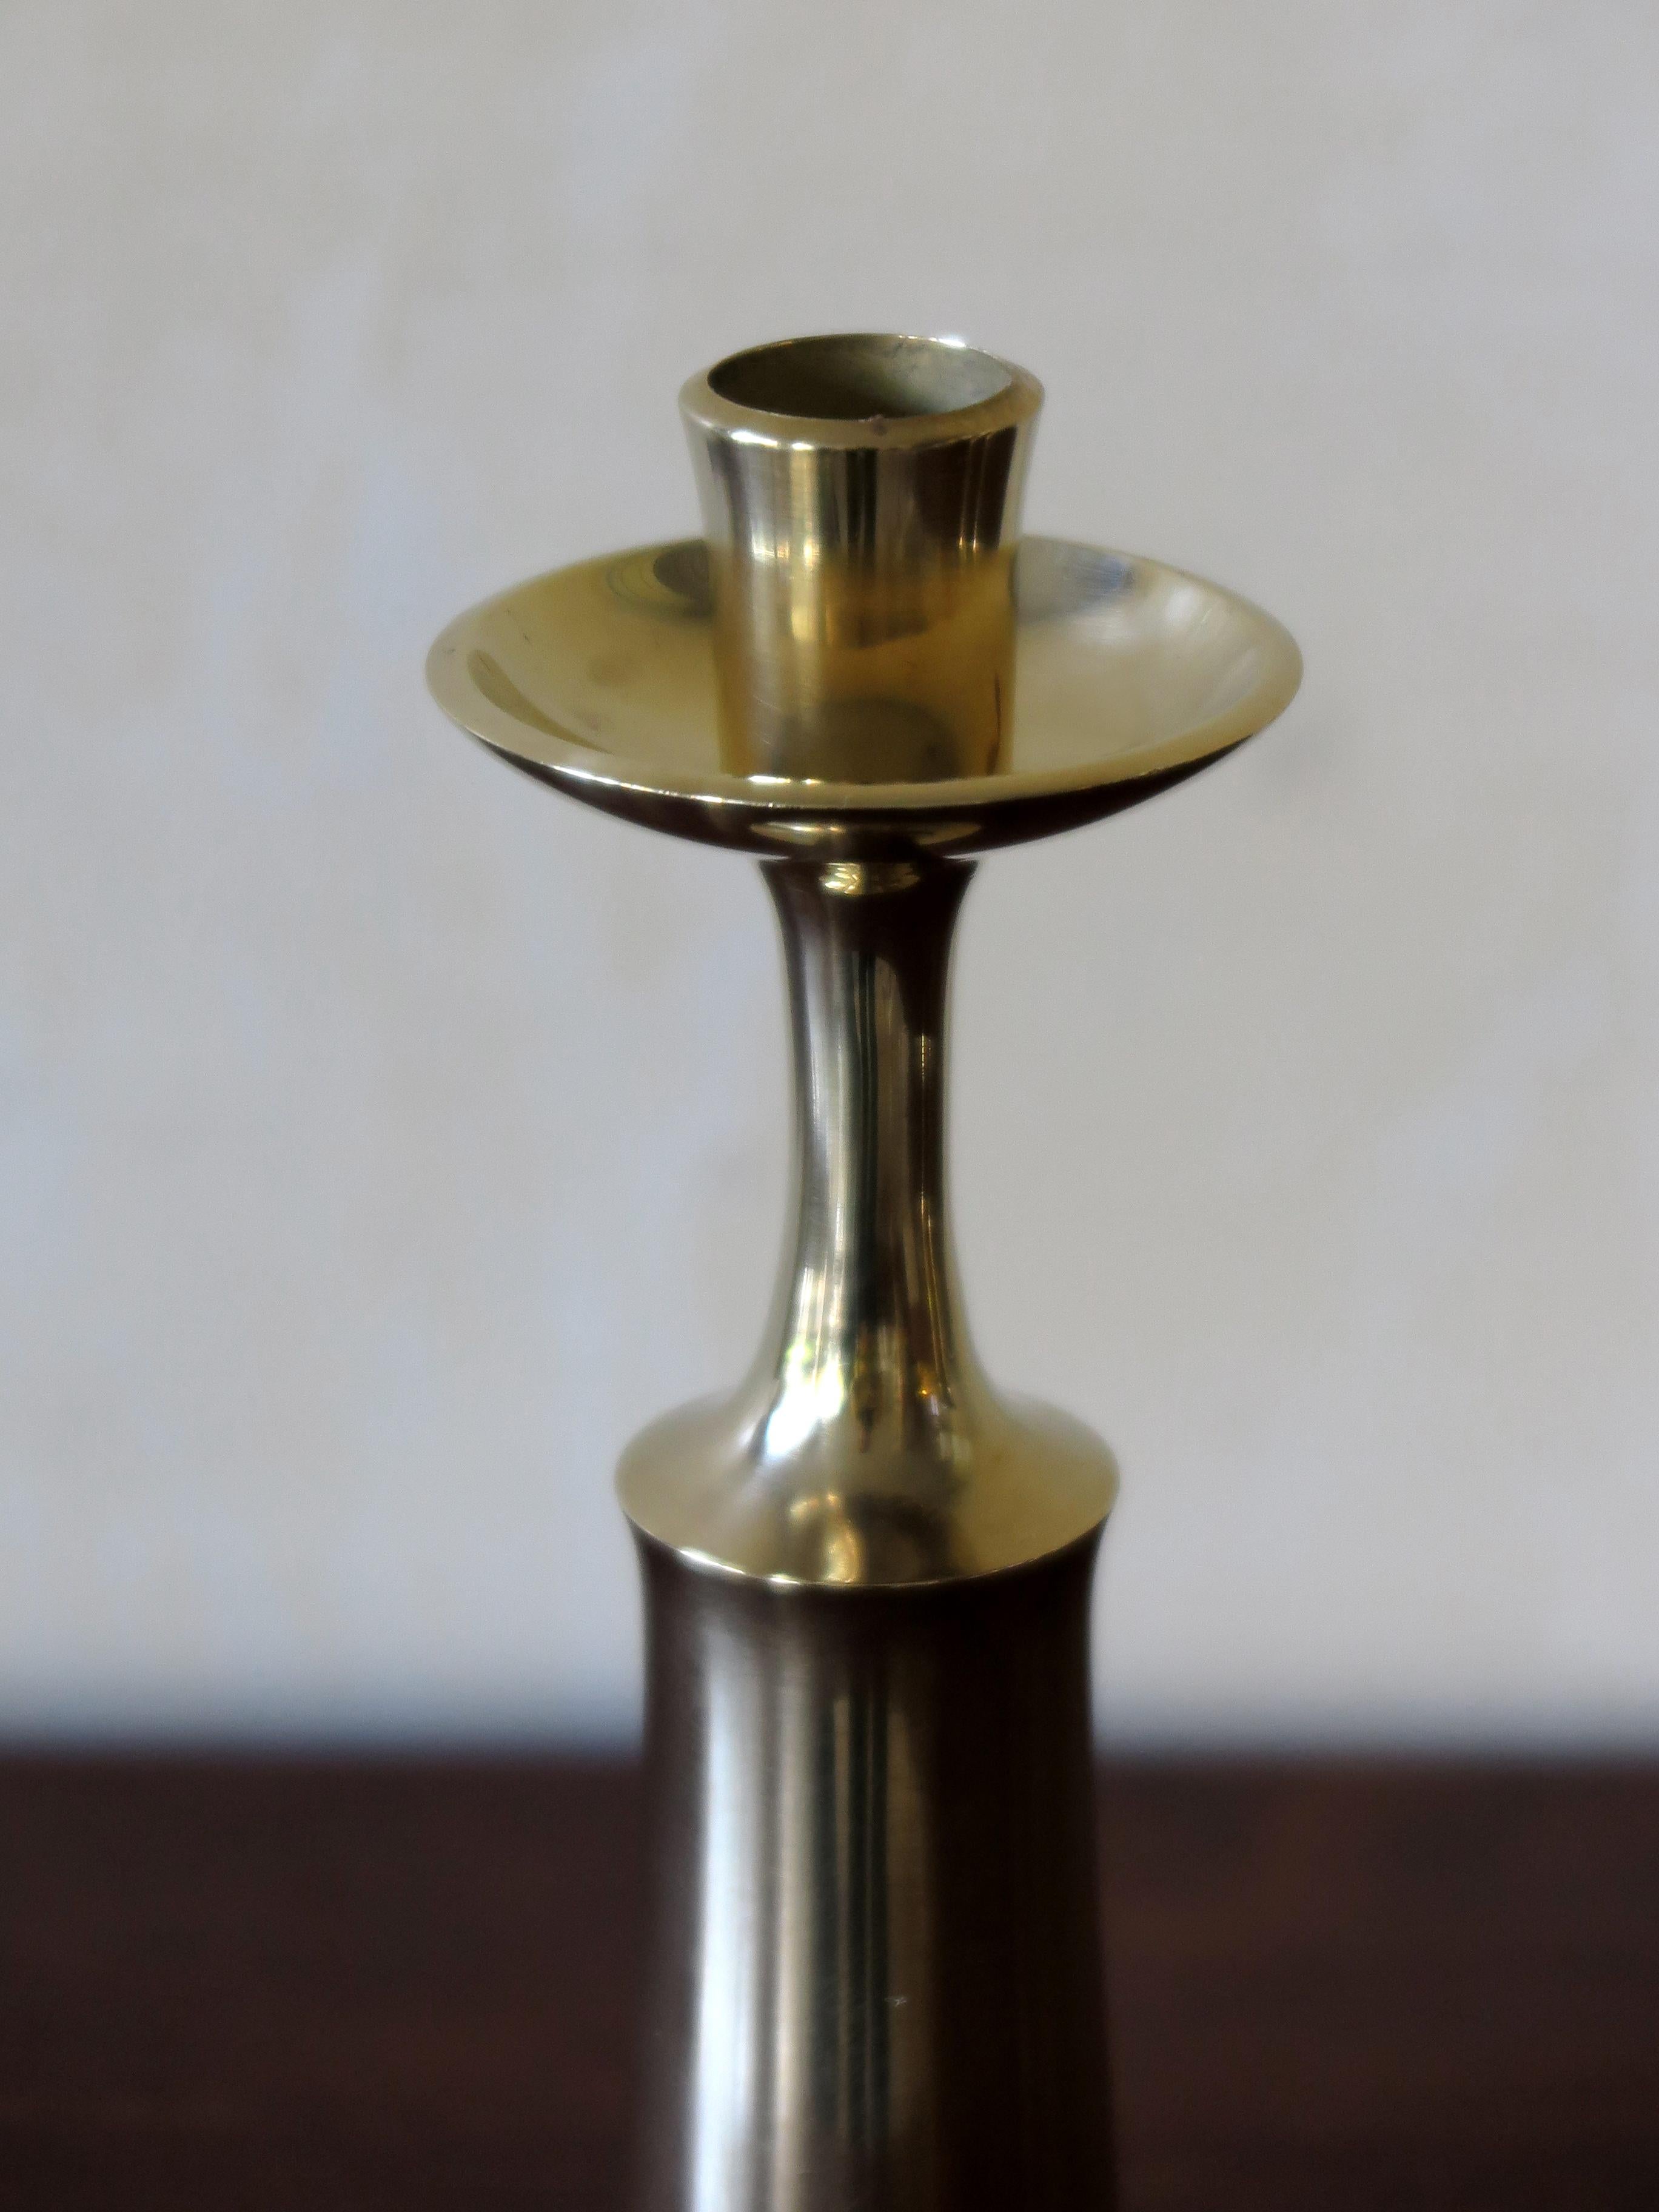 Brass Mid-Century Modern candlestick designed by Jens Harald Quistgaard for Dansk Design, Denmark, circa 1950.
Manufacturer and designer brand engraved inside.
Please note that the item is original of the period and this shows normal signs of age